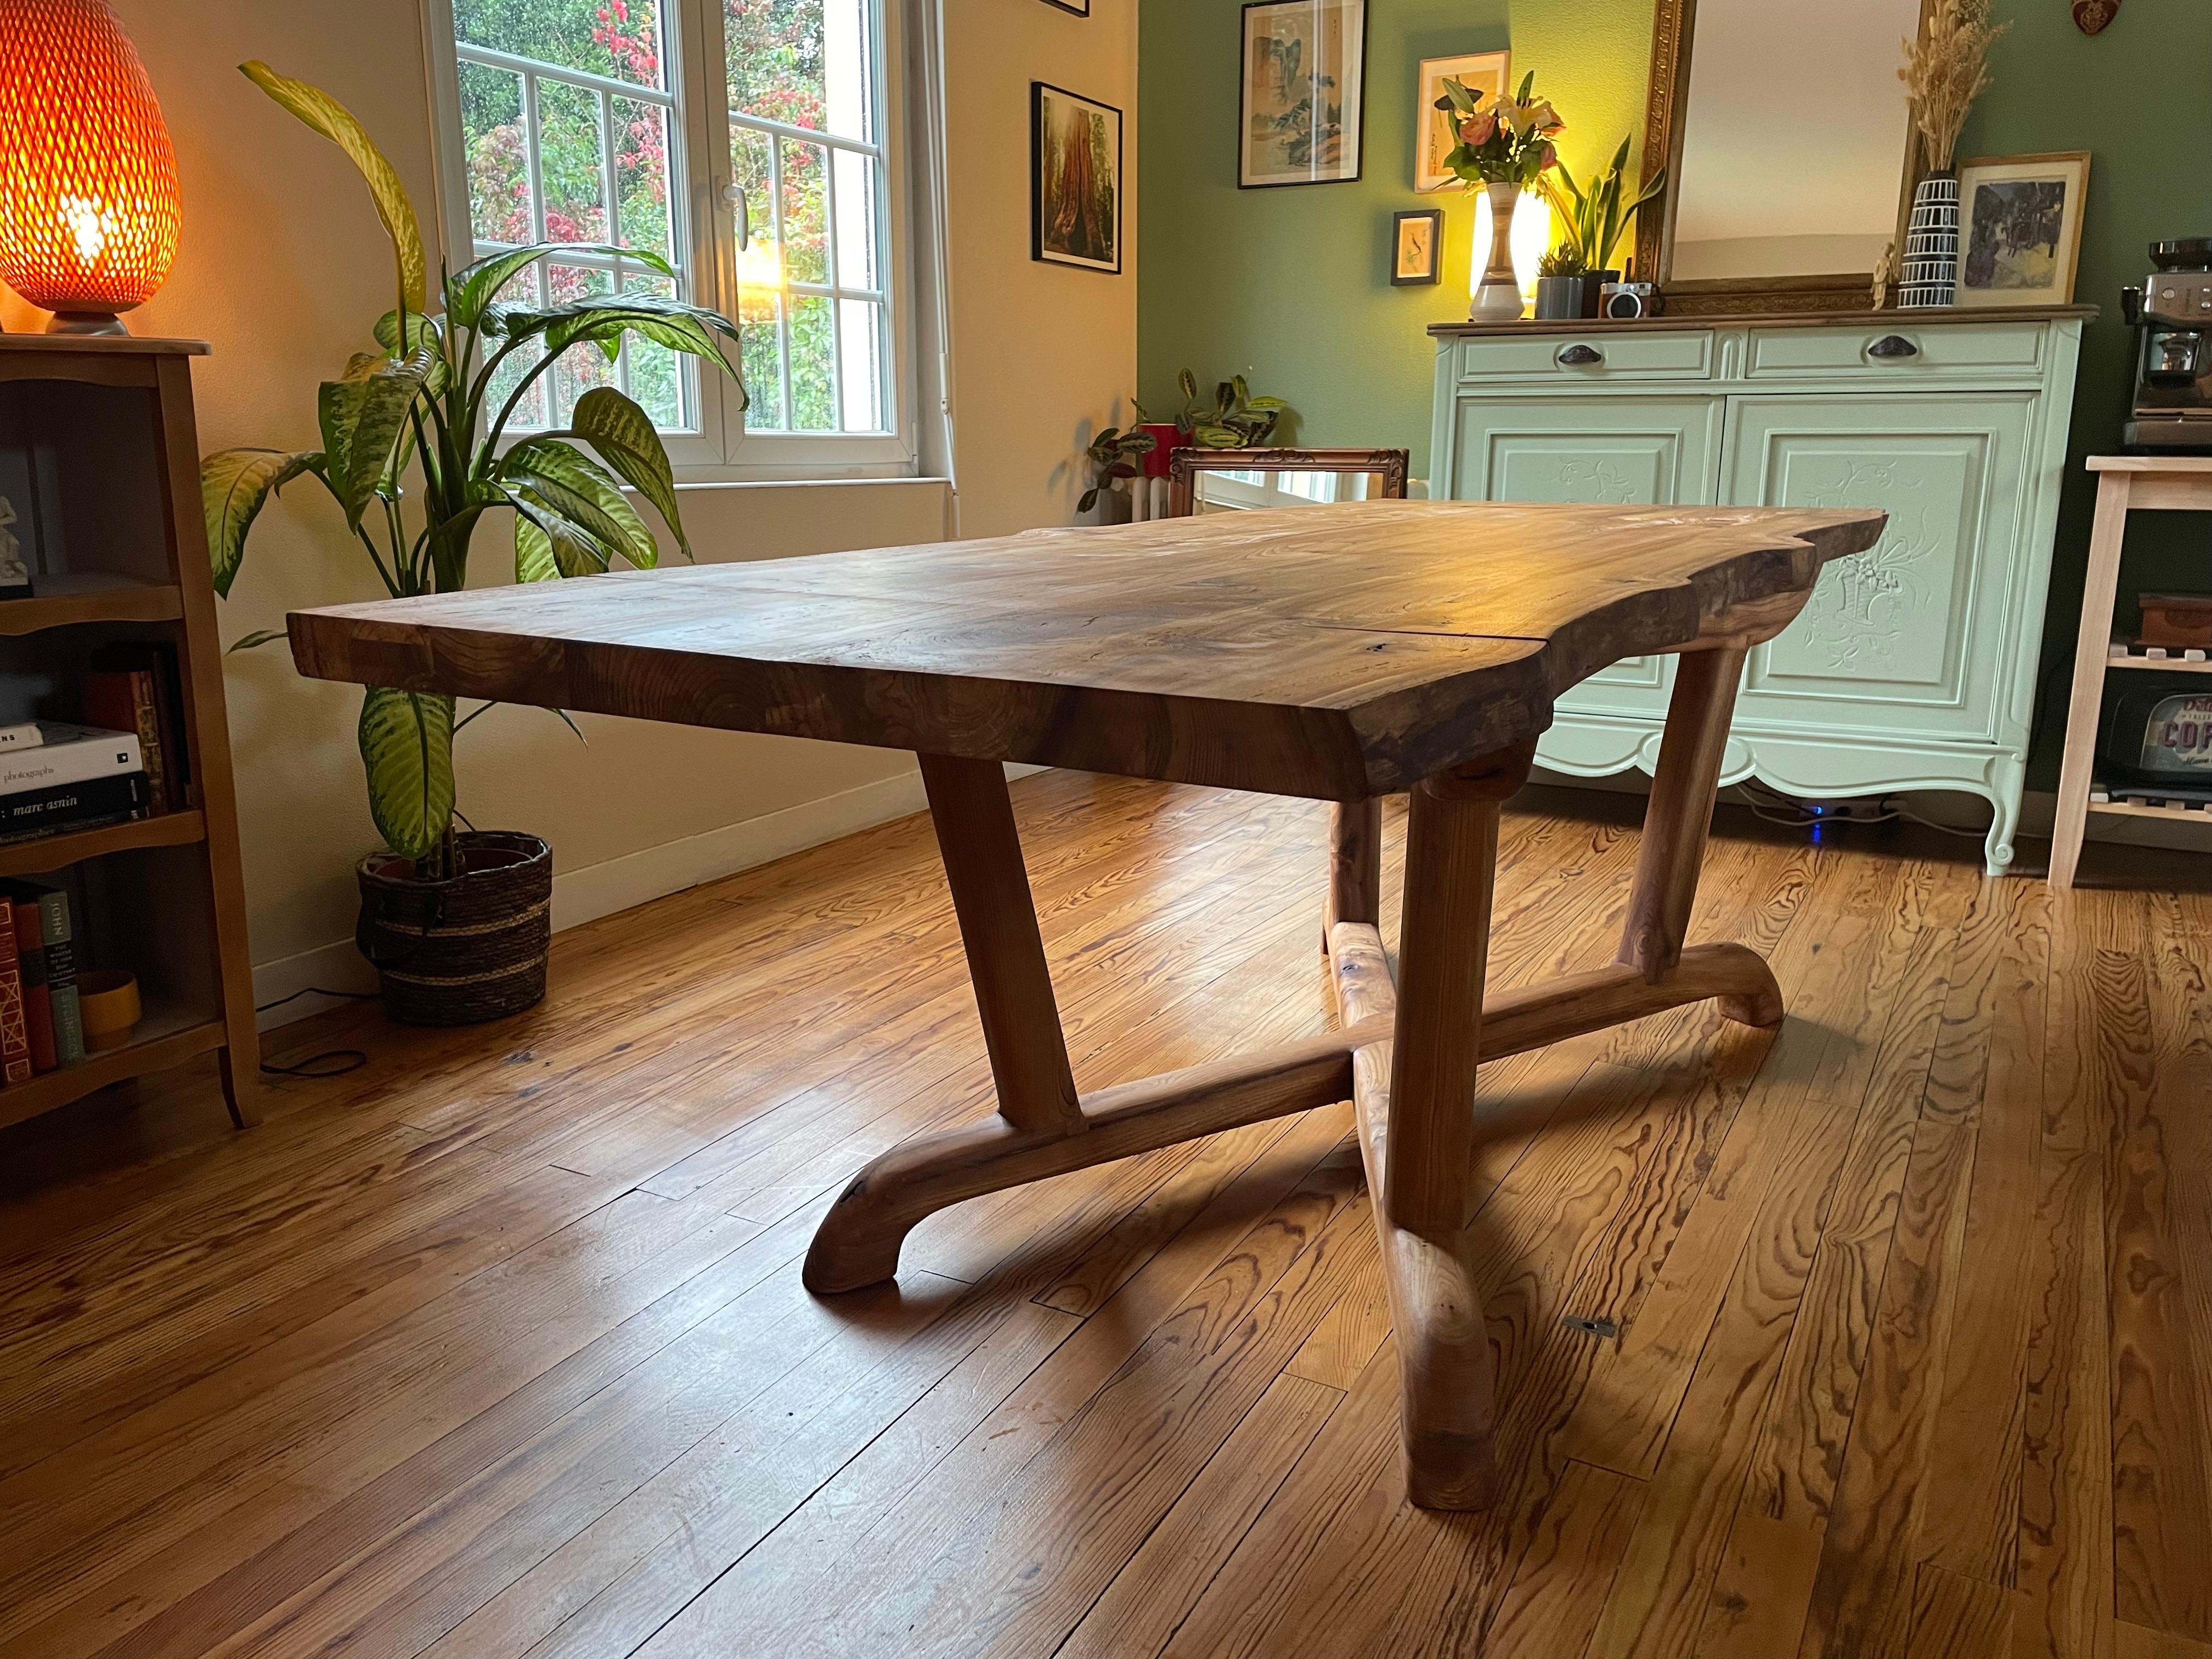 Rustic Extendable Dining Table - Reclaimed Elm Wood For Sale